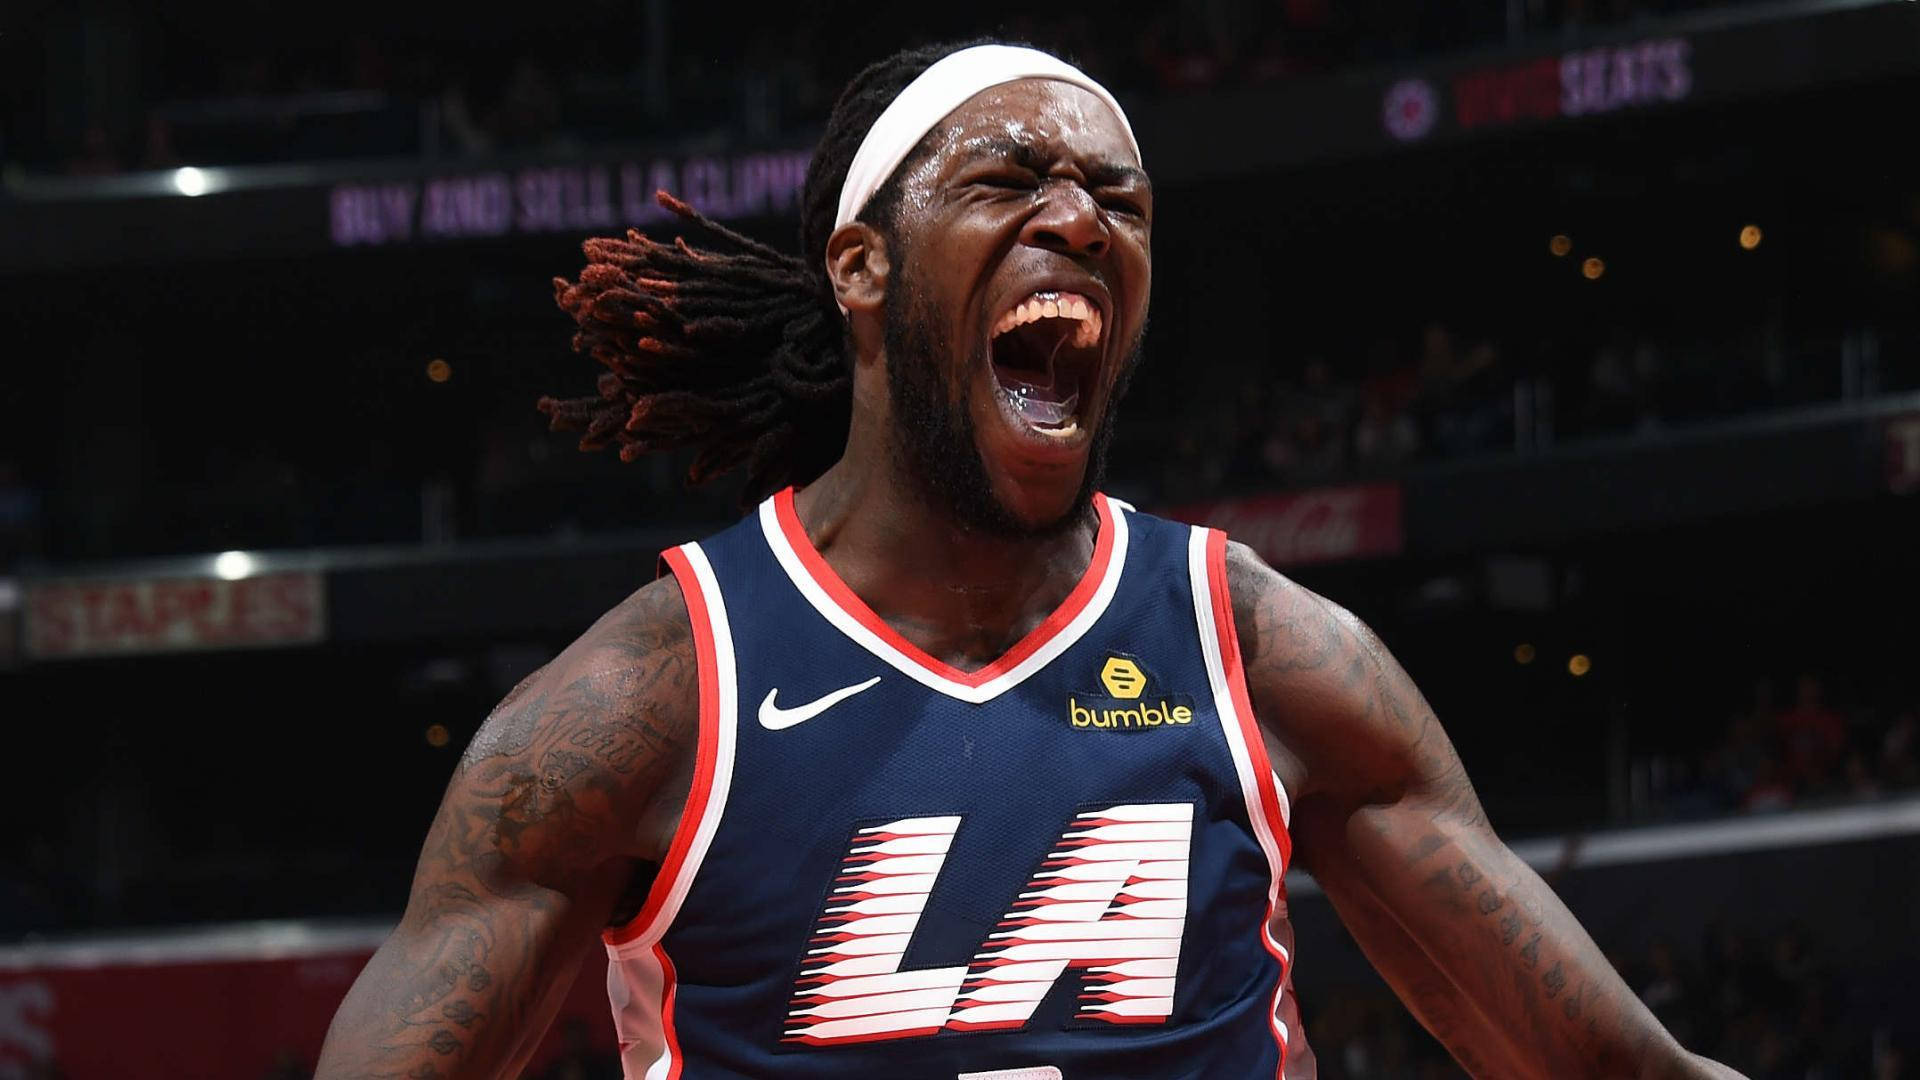 Montrezl Harrell in a display of passion during a game Wallpaper